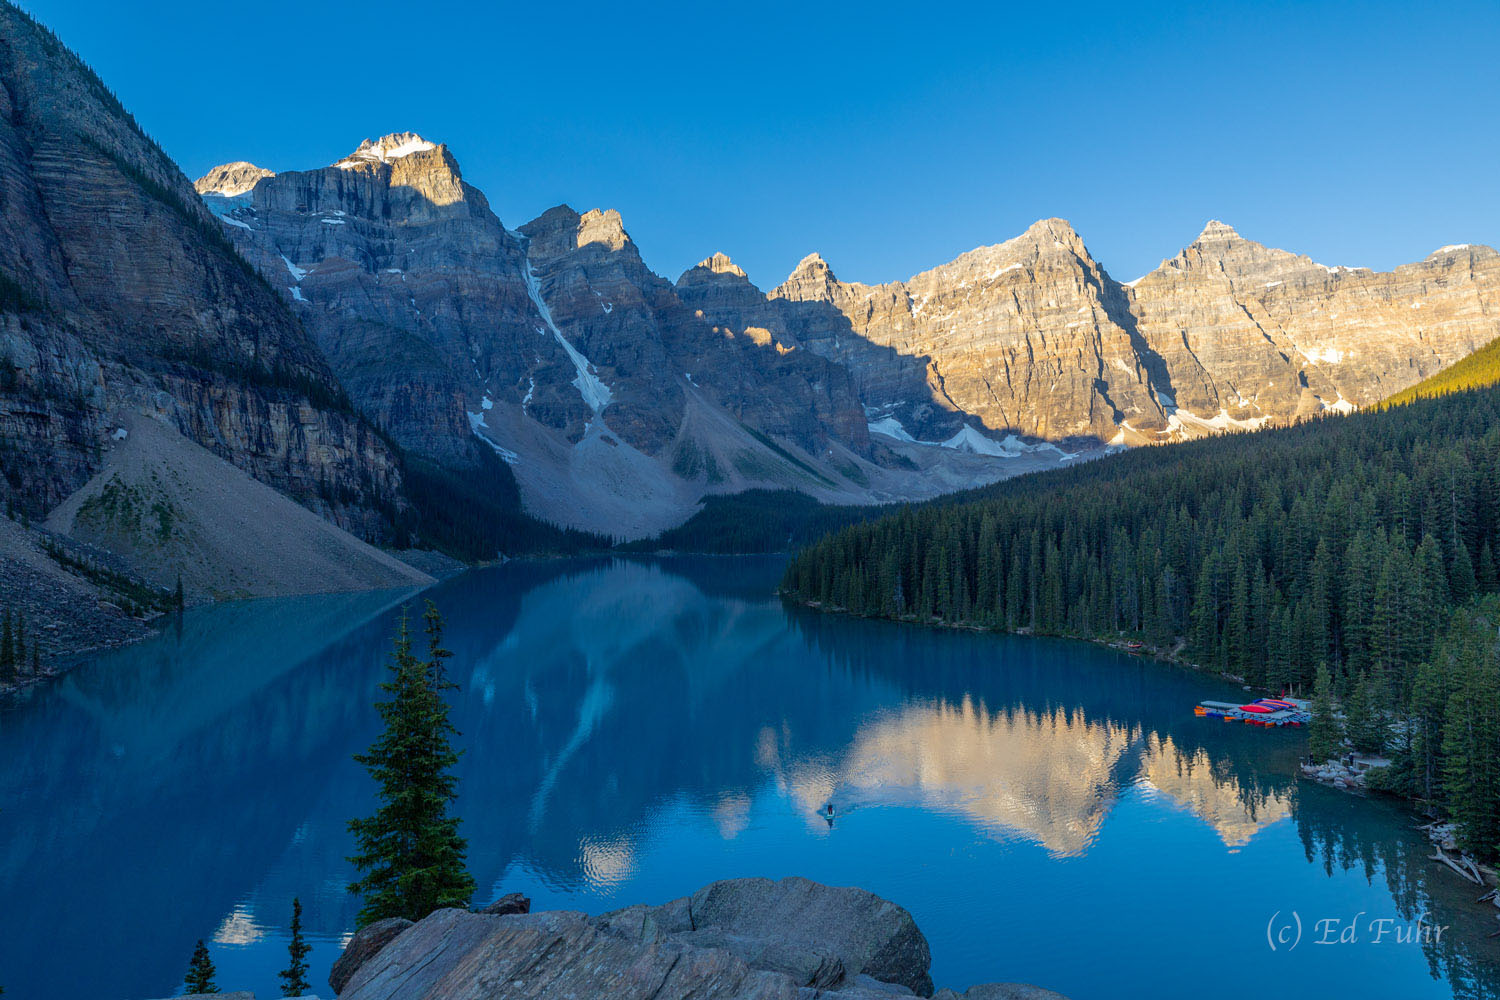 On the eastern shore of Moraine Lake, a tall pile of glacial rock is a popular place to witness sunrise as is it reaches the...